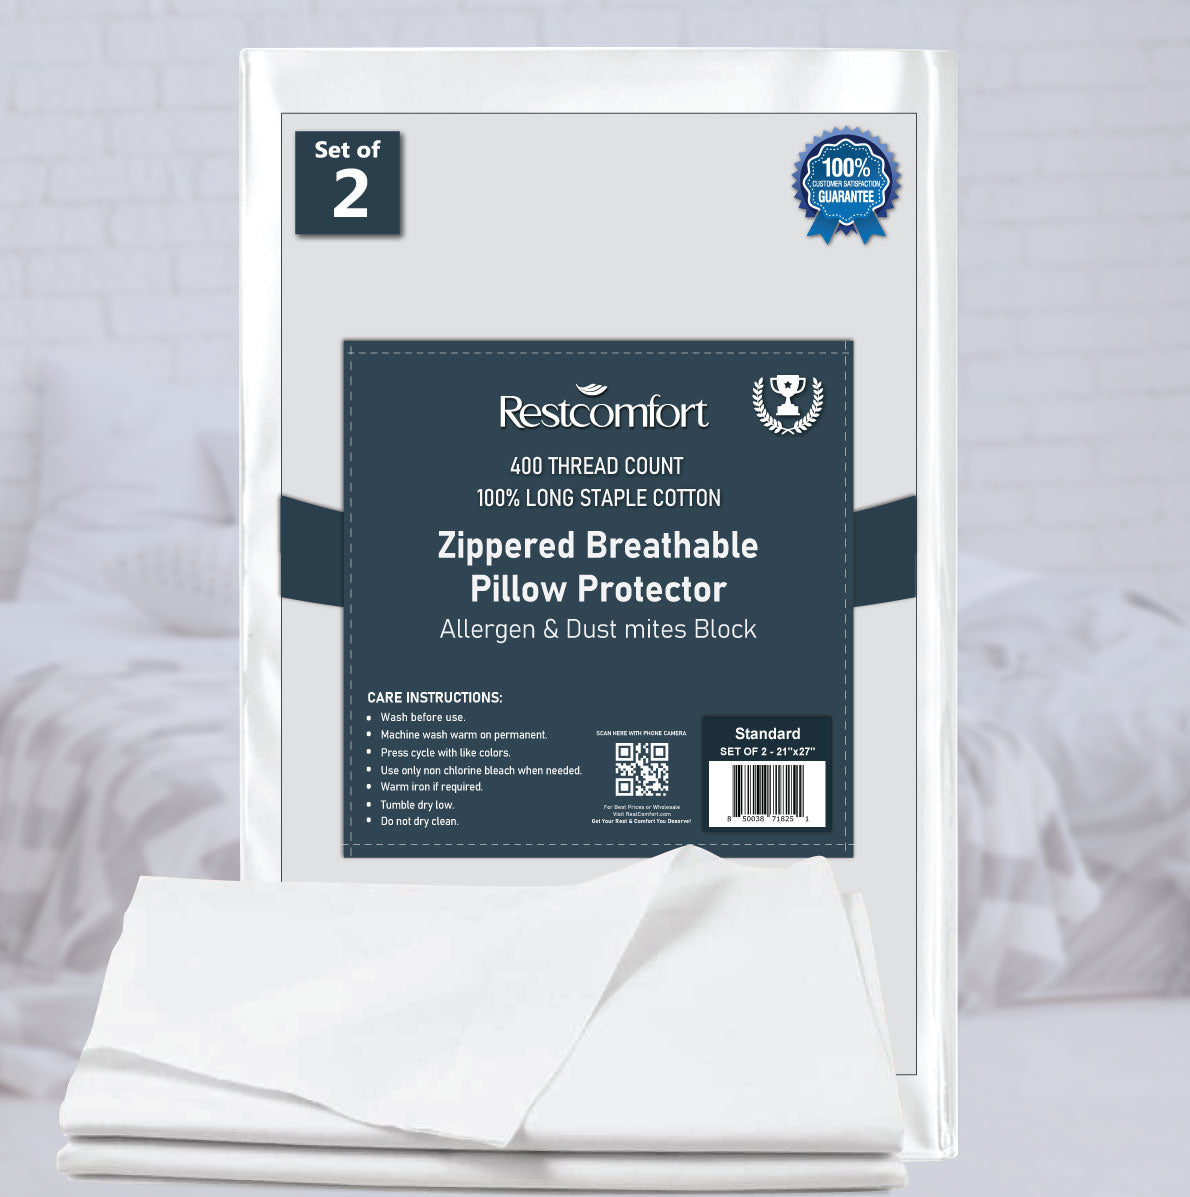 2 Pack Zippered Breathable Pillow Cases Protector, 400 TC 100% Long Staple Cotton, Allergen & Dust Mites Block